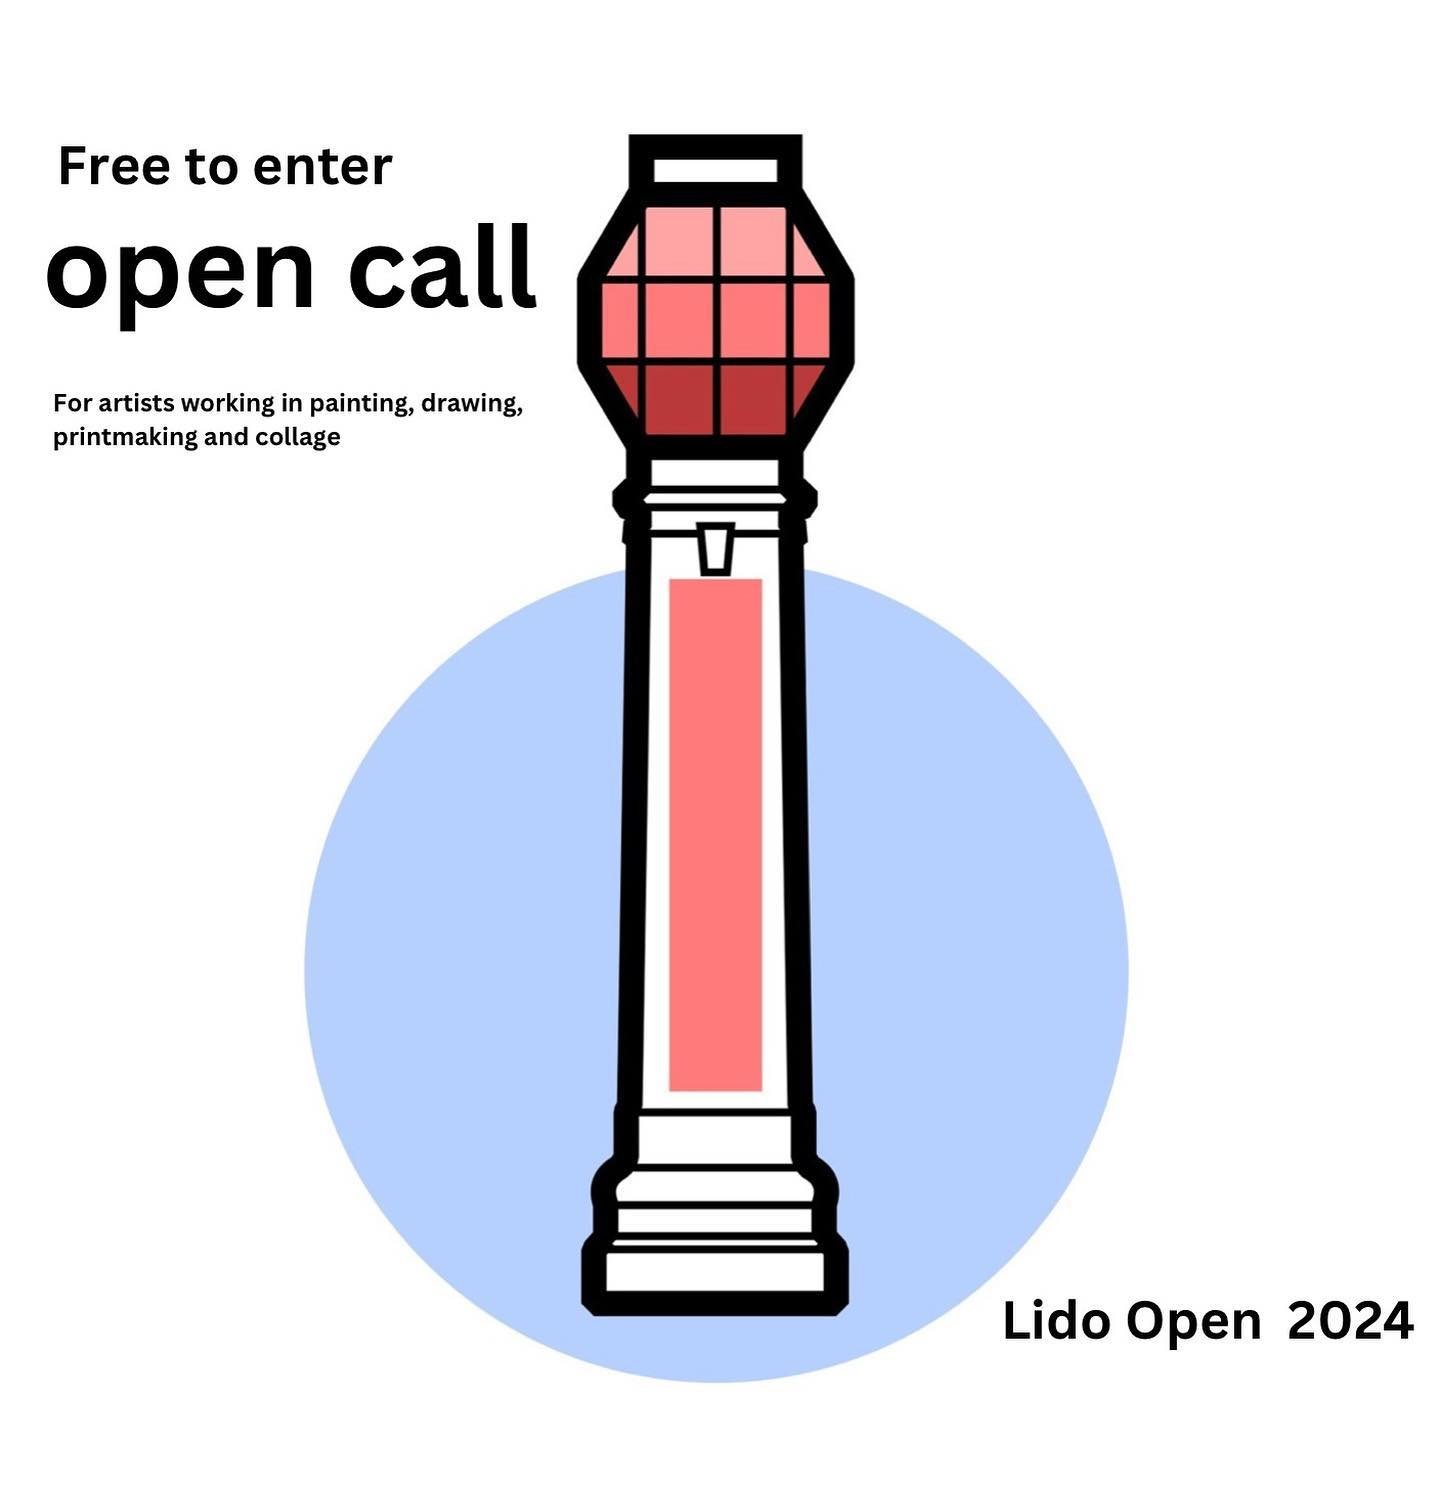 D E A D L I N E  L O O M S

I don&rsquo;t want to panic you but there&rsquo;s just over 3 weeks left to apply to this years&rsquo; Lido Open! The deadline to apply is 2 June 2024. 

This years&rsquo; guest judge is the wonderful artist Vincent Hawkin